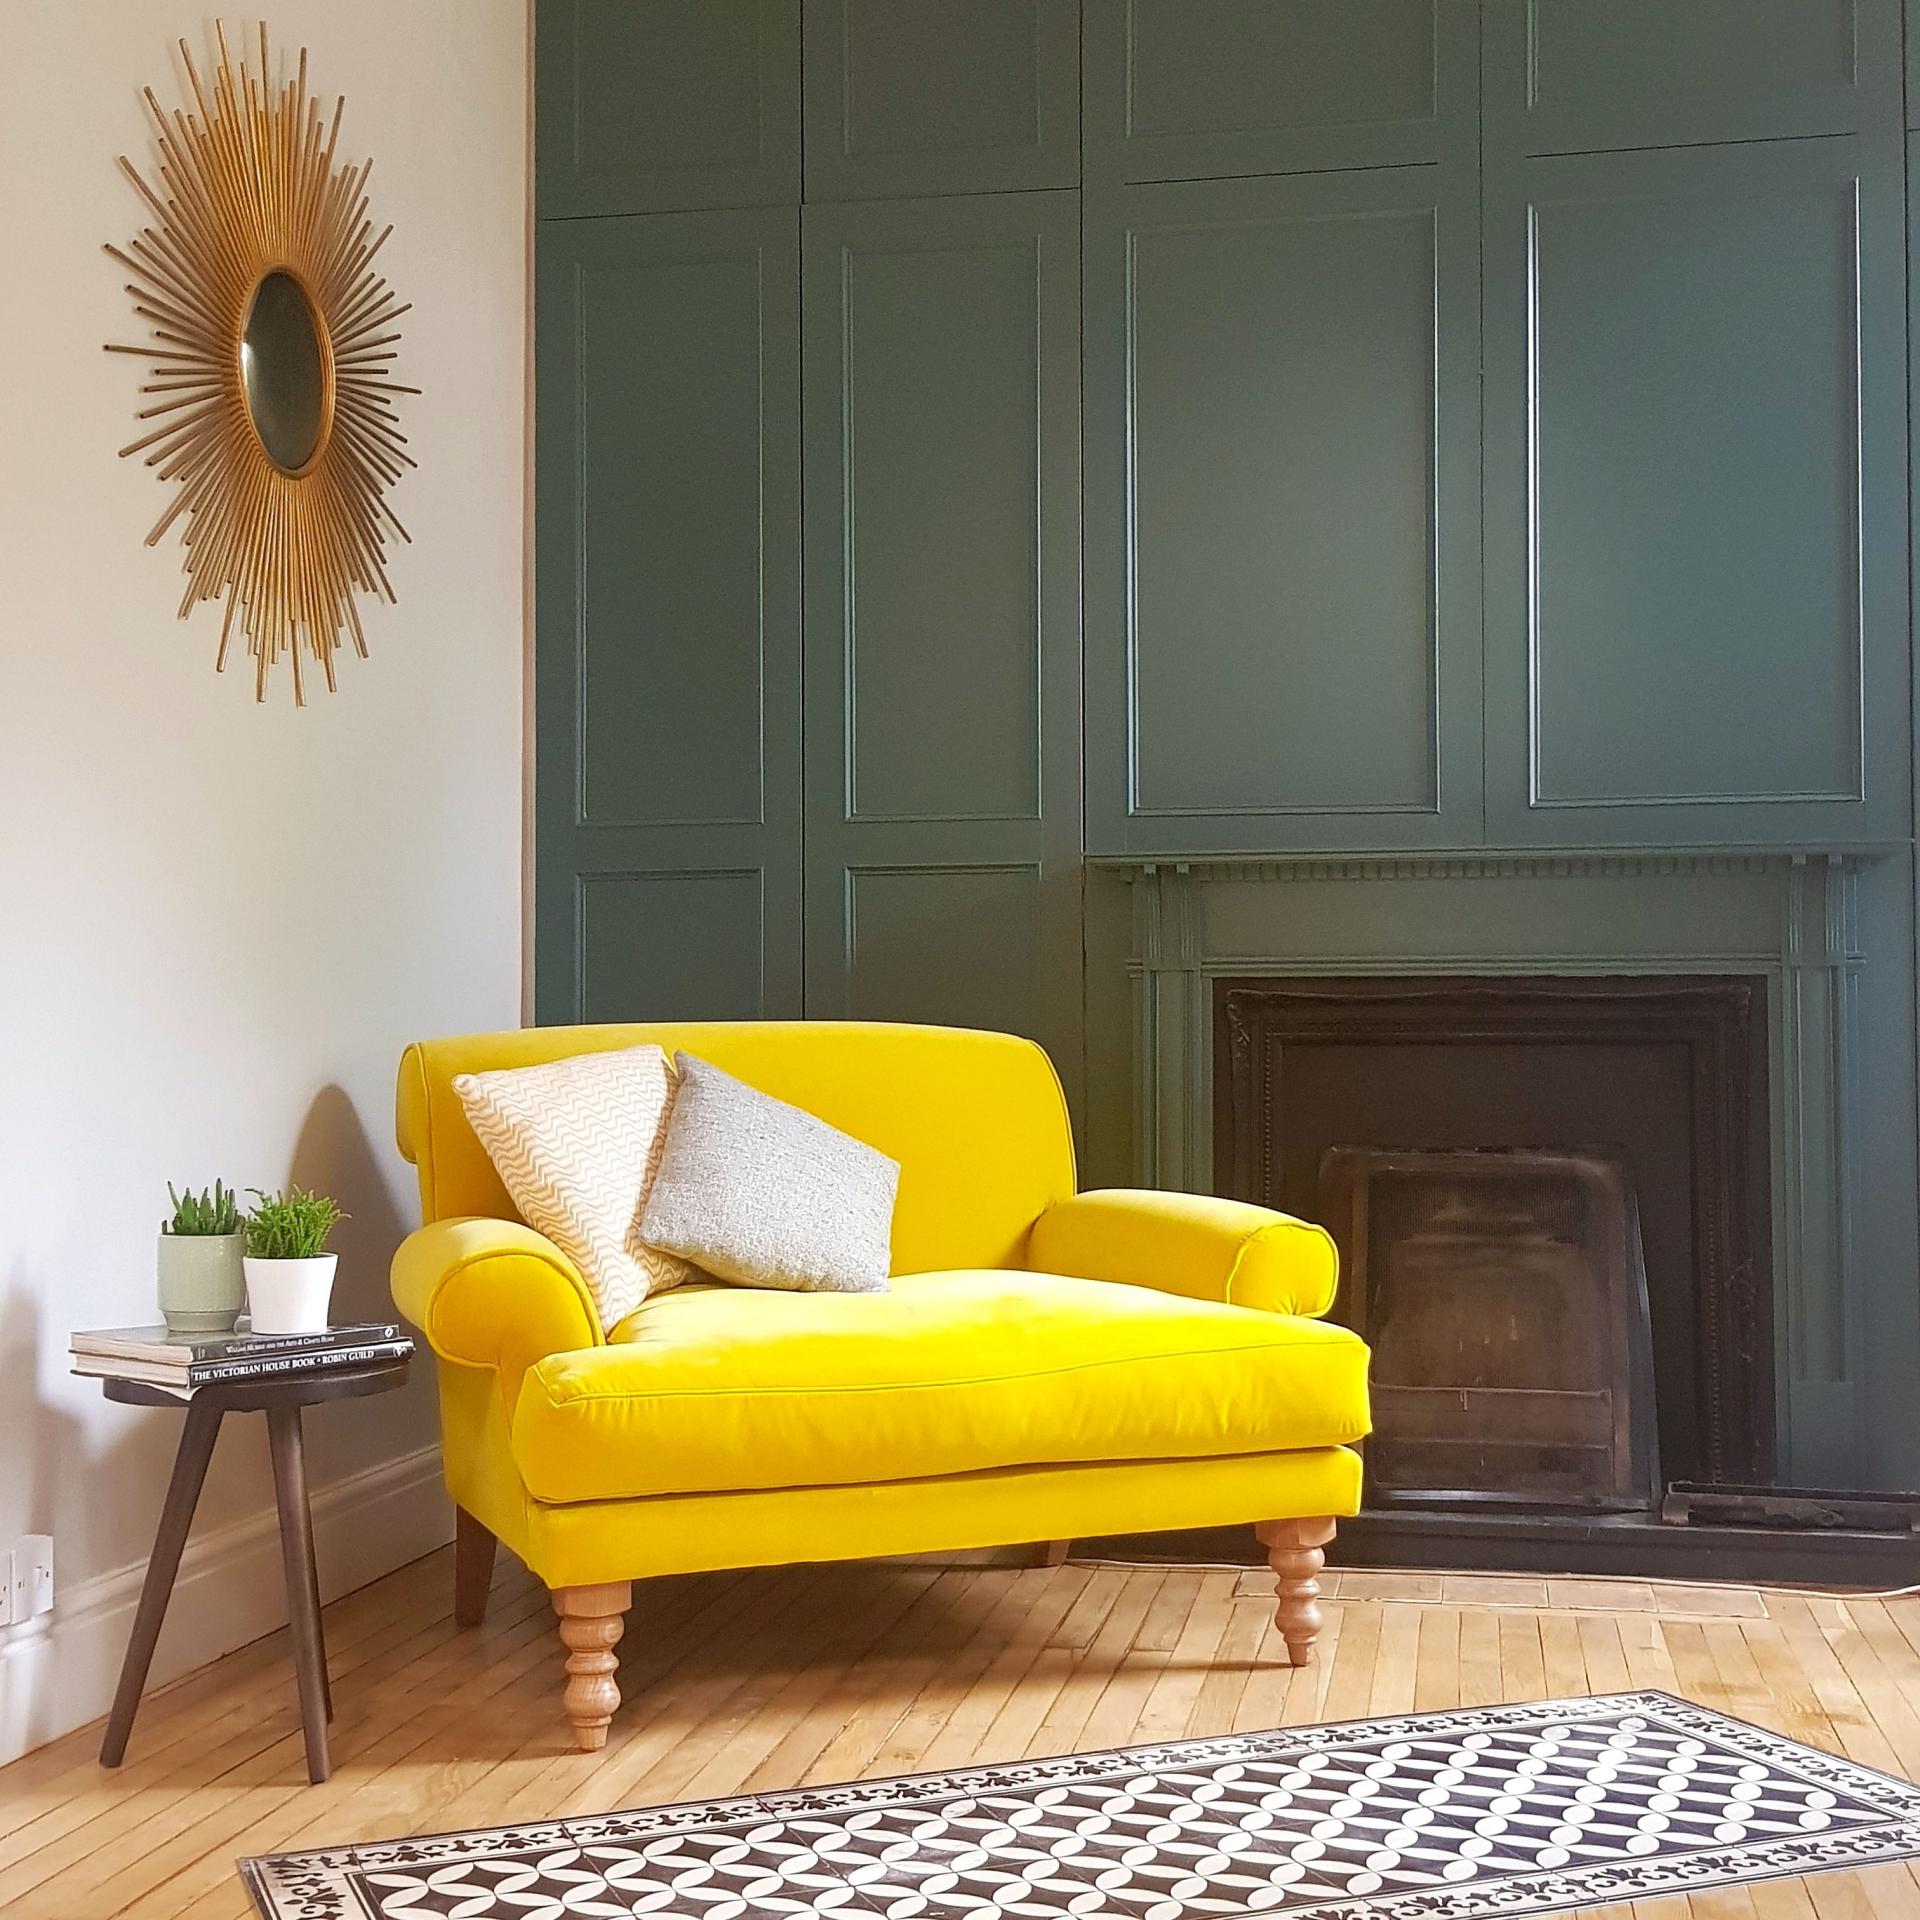 Green Panelled Walls with Yellow Chair | Green Living Room Inspiration| Today we're talking inspiration for a green living room. Green is a really versatile colour to decorate your home with. But, which colours and tones work well? What kind of accessories work with green? This post gives you ideas for pulling together an elegant green colour palette and pieces for your home. Read more: kittyandb.com #greenlivingroom #greencolorpalette #Greenandyellow #greenaesthetic #colourfulhomedecor